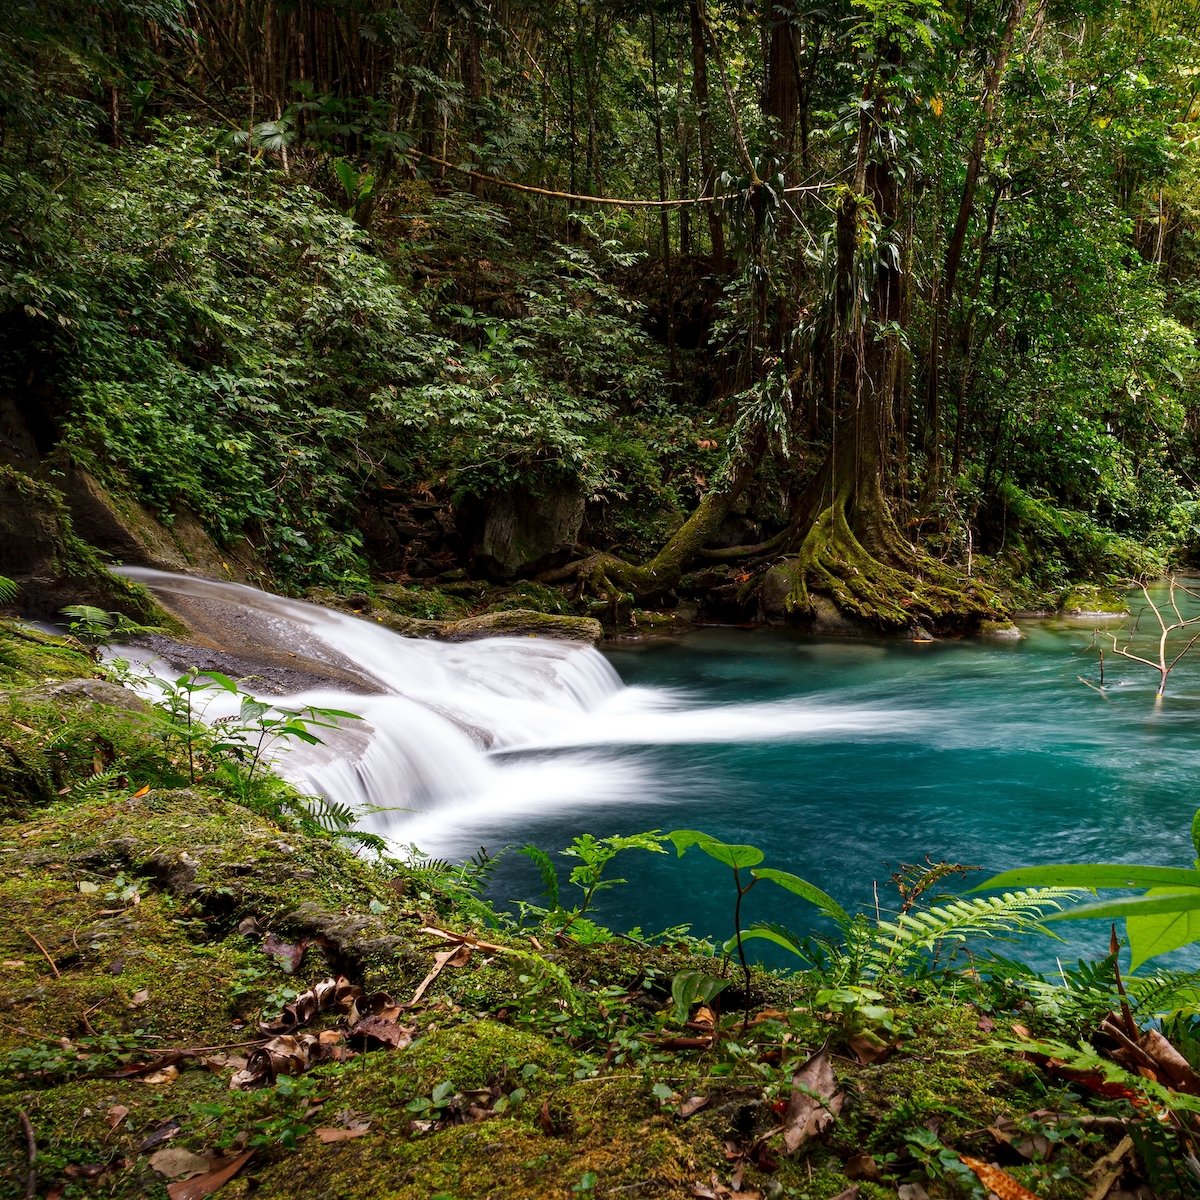 Top 9 Hidden Gems Across The Island Of Jamaica According To A Local ...